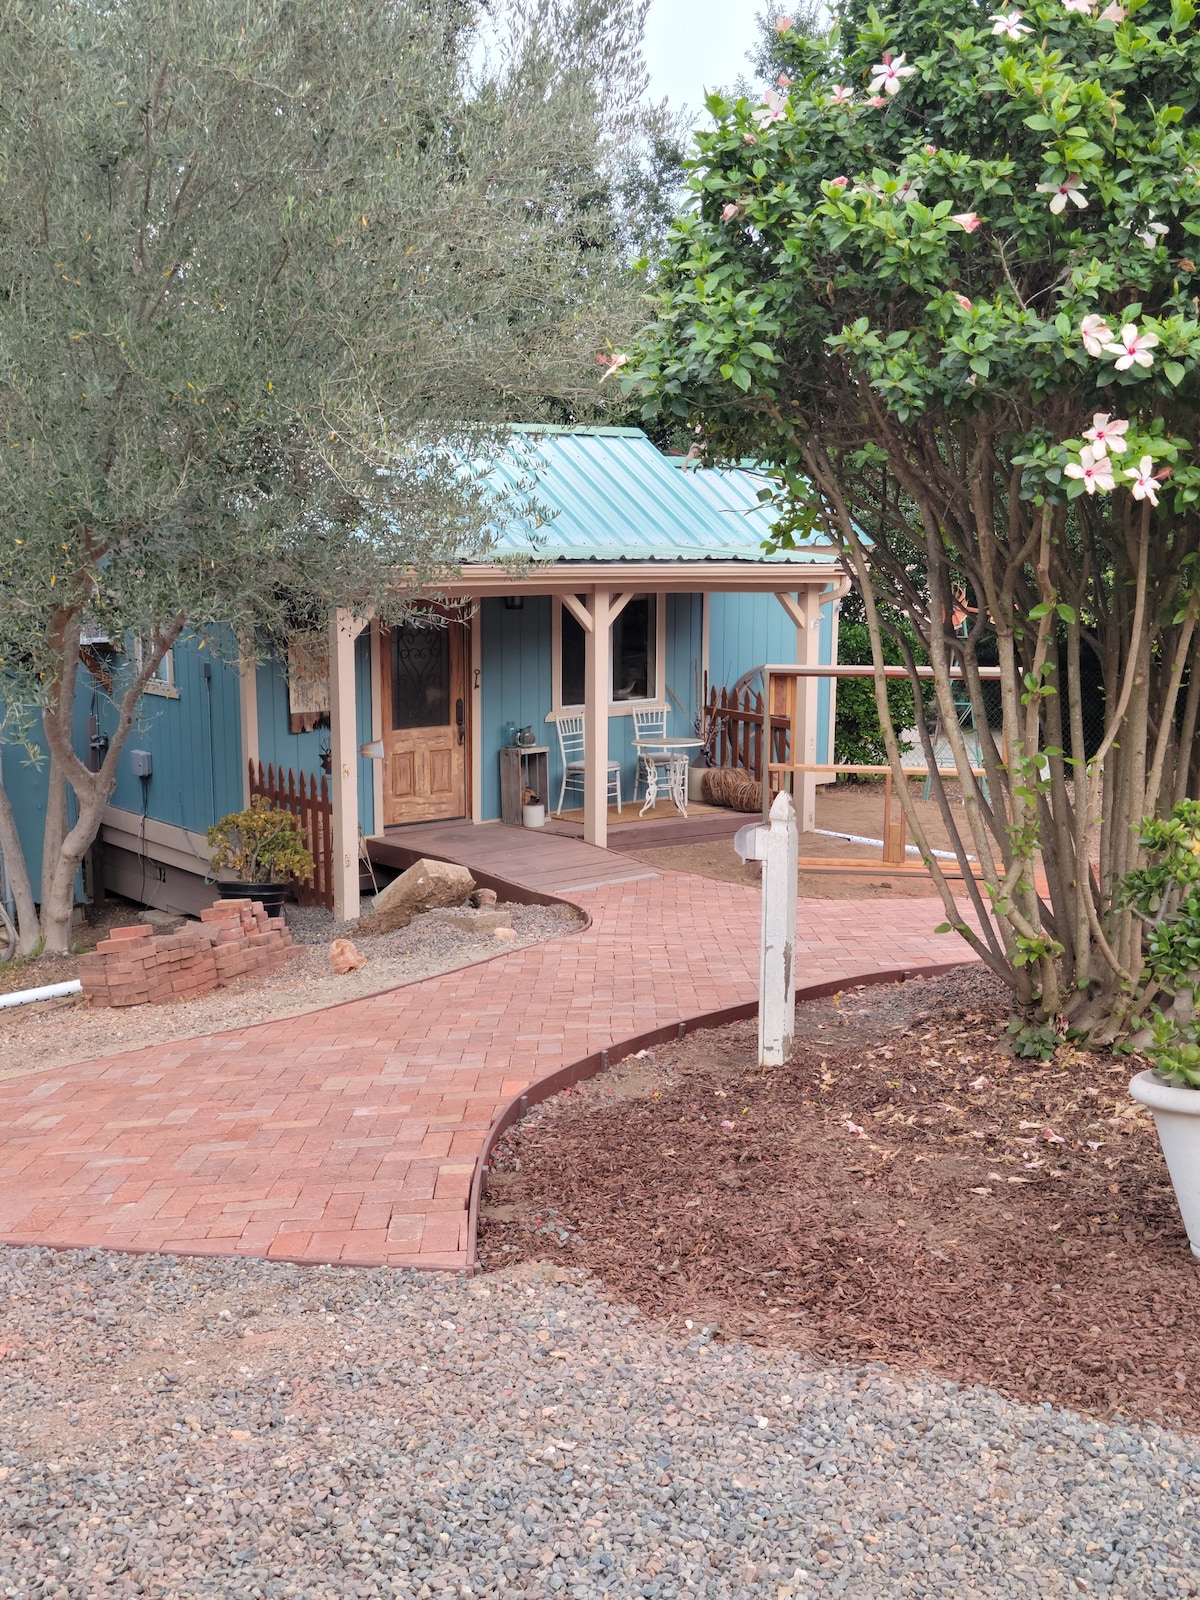 Lovely Roma Cottage in Fallbrook